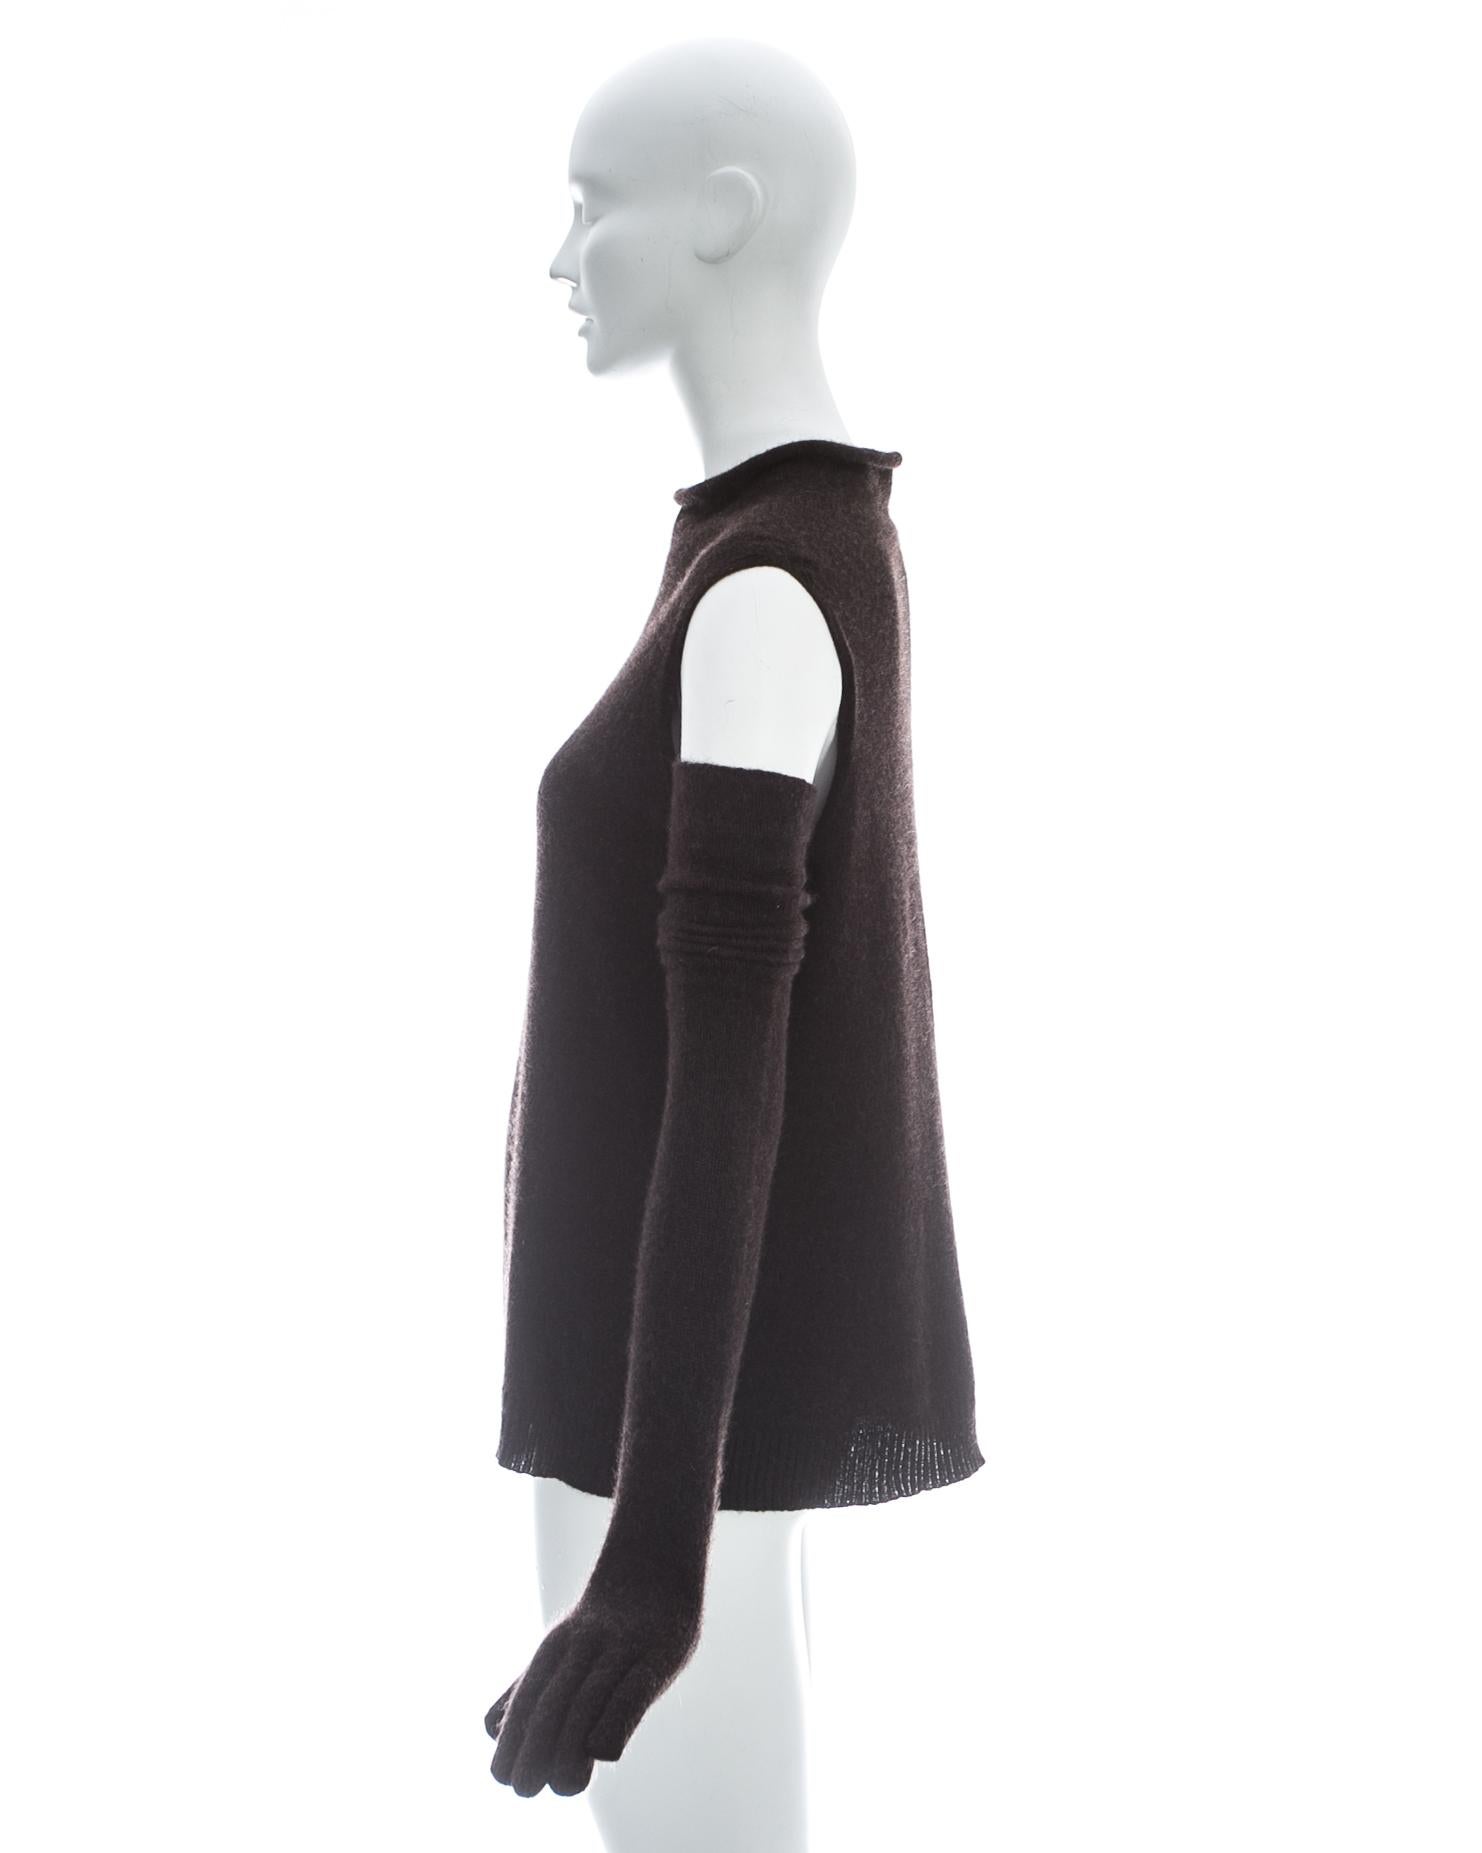 Black Hermes by Martin Margiela brown cashmere sweater vest and long gloves, ca. 2002 For Sale